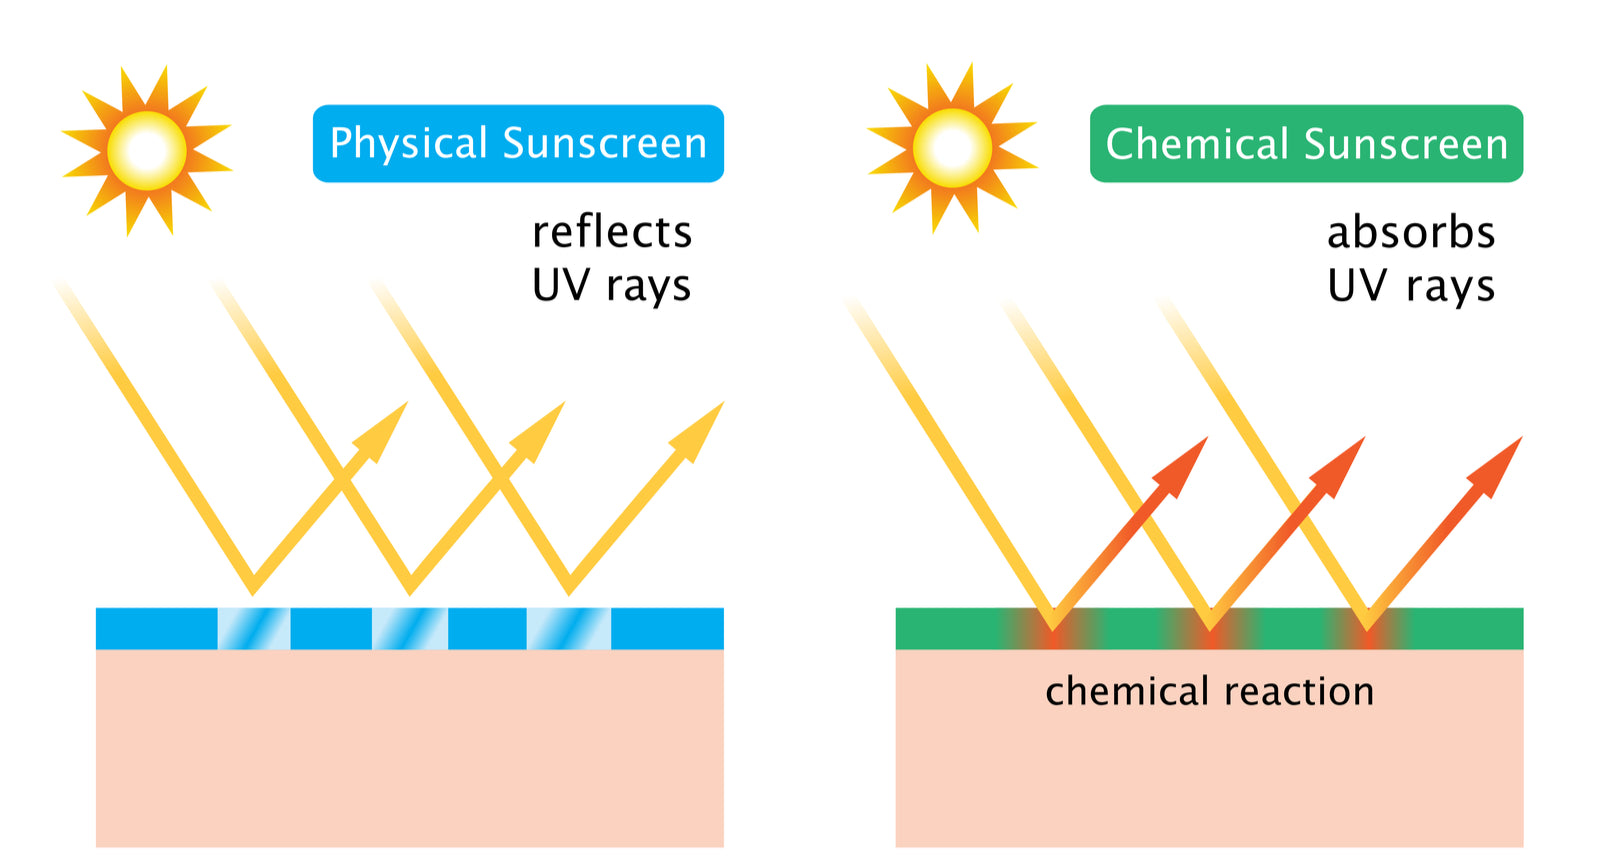 Chemical sunscreen and or vs Physical sunscreen